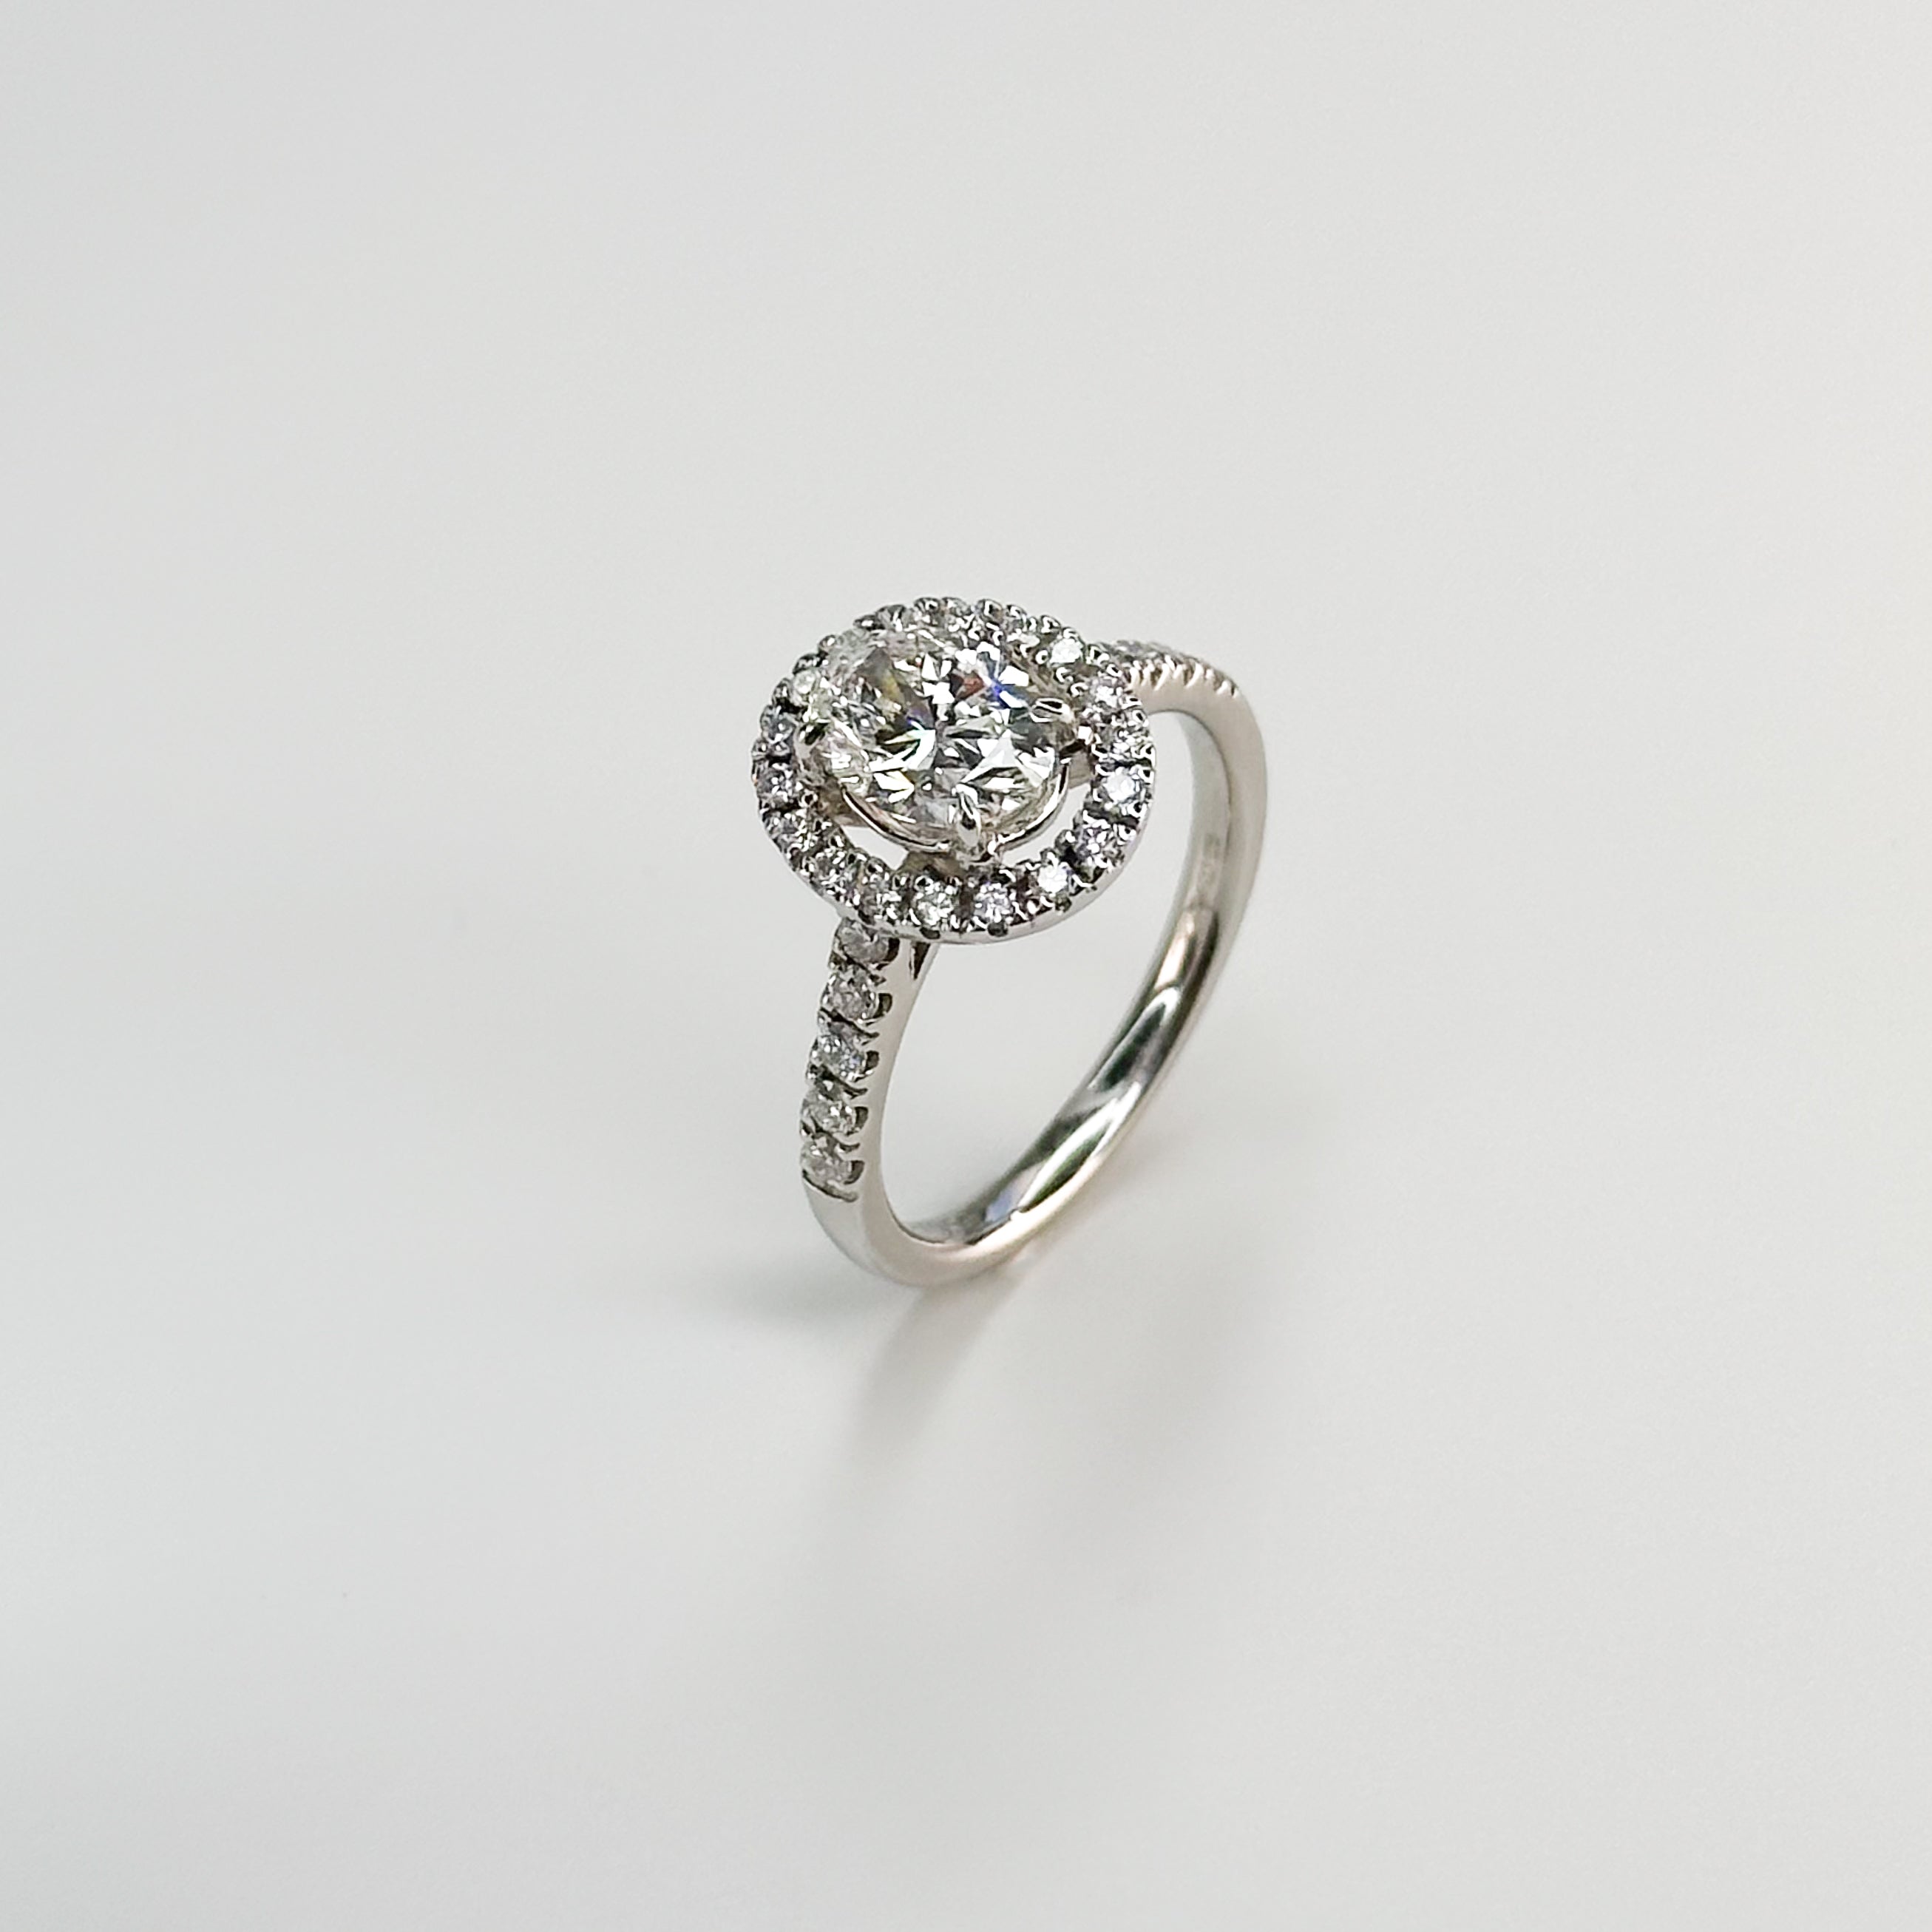 1.00ct GIA Oval Diamond Ring with Halo